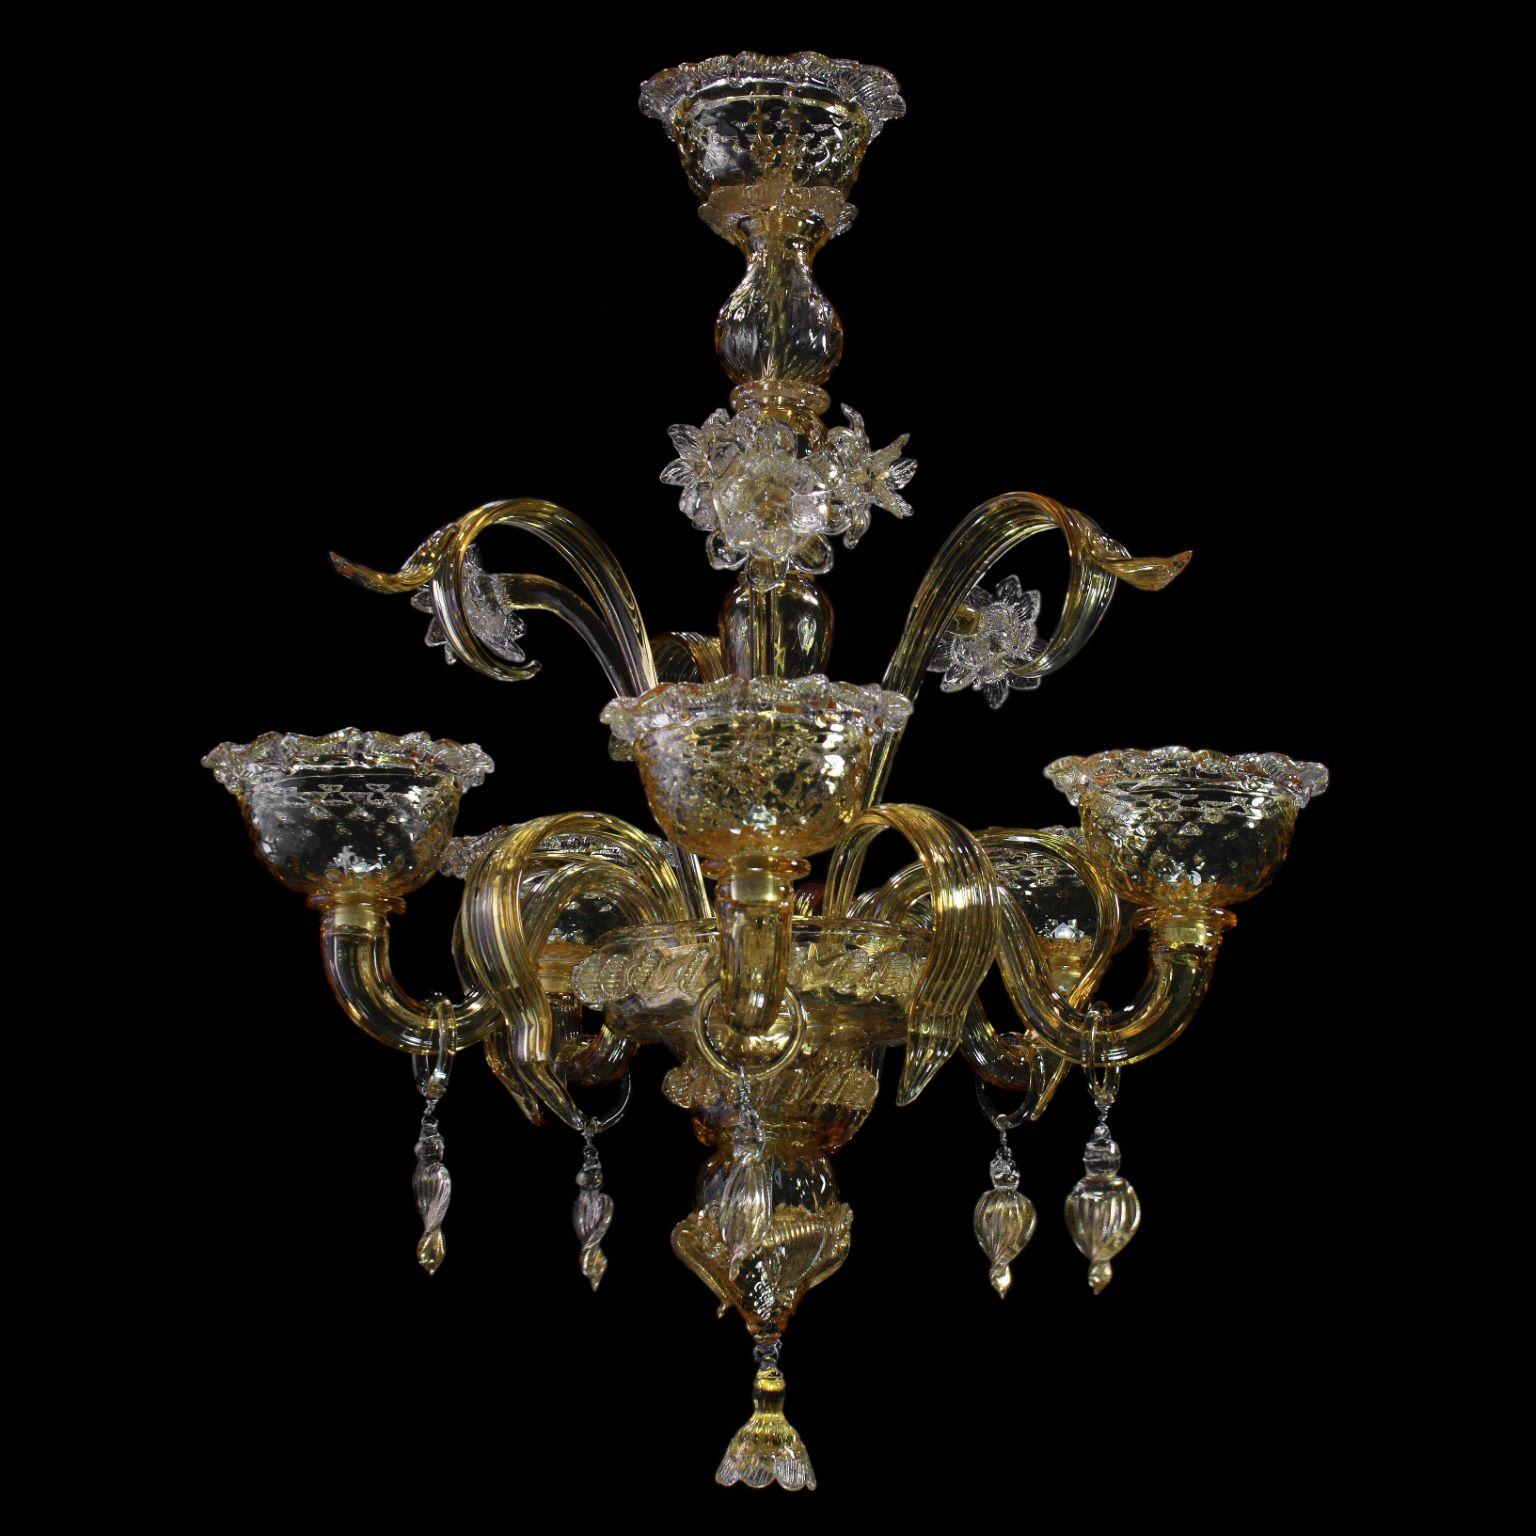 Blown Glass Artistic Chandelier 5 Arms Amber Murano Glass, Gold Details by Multiforme For Sale